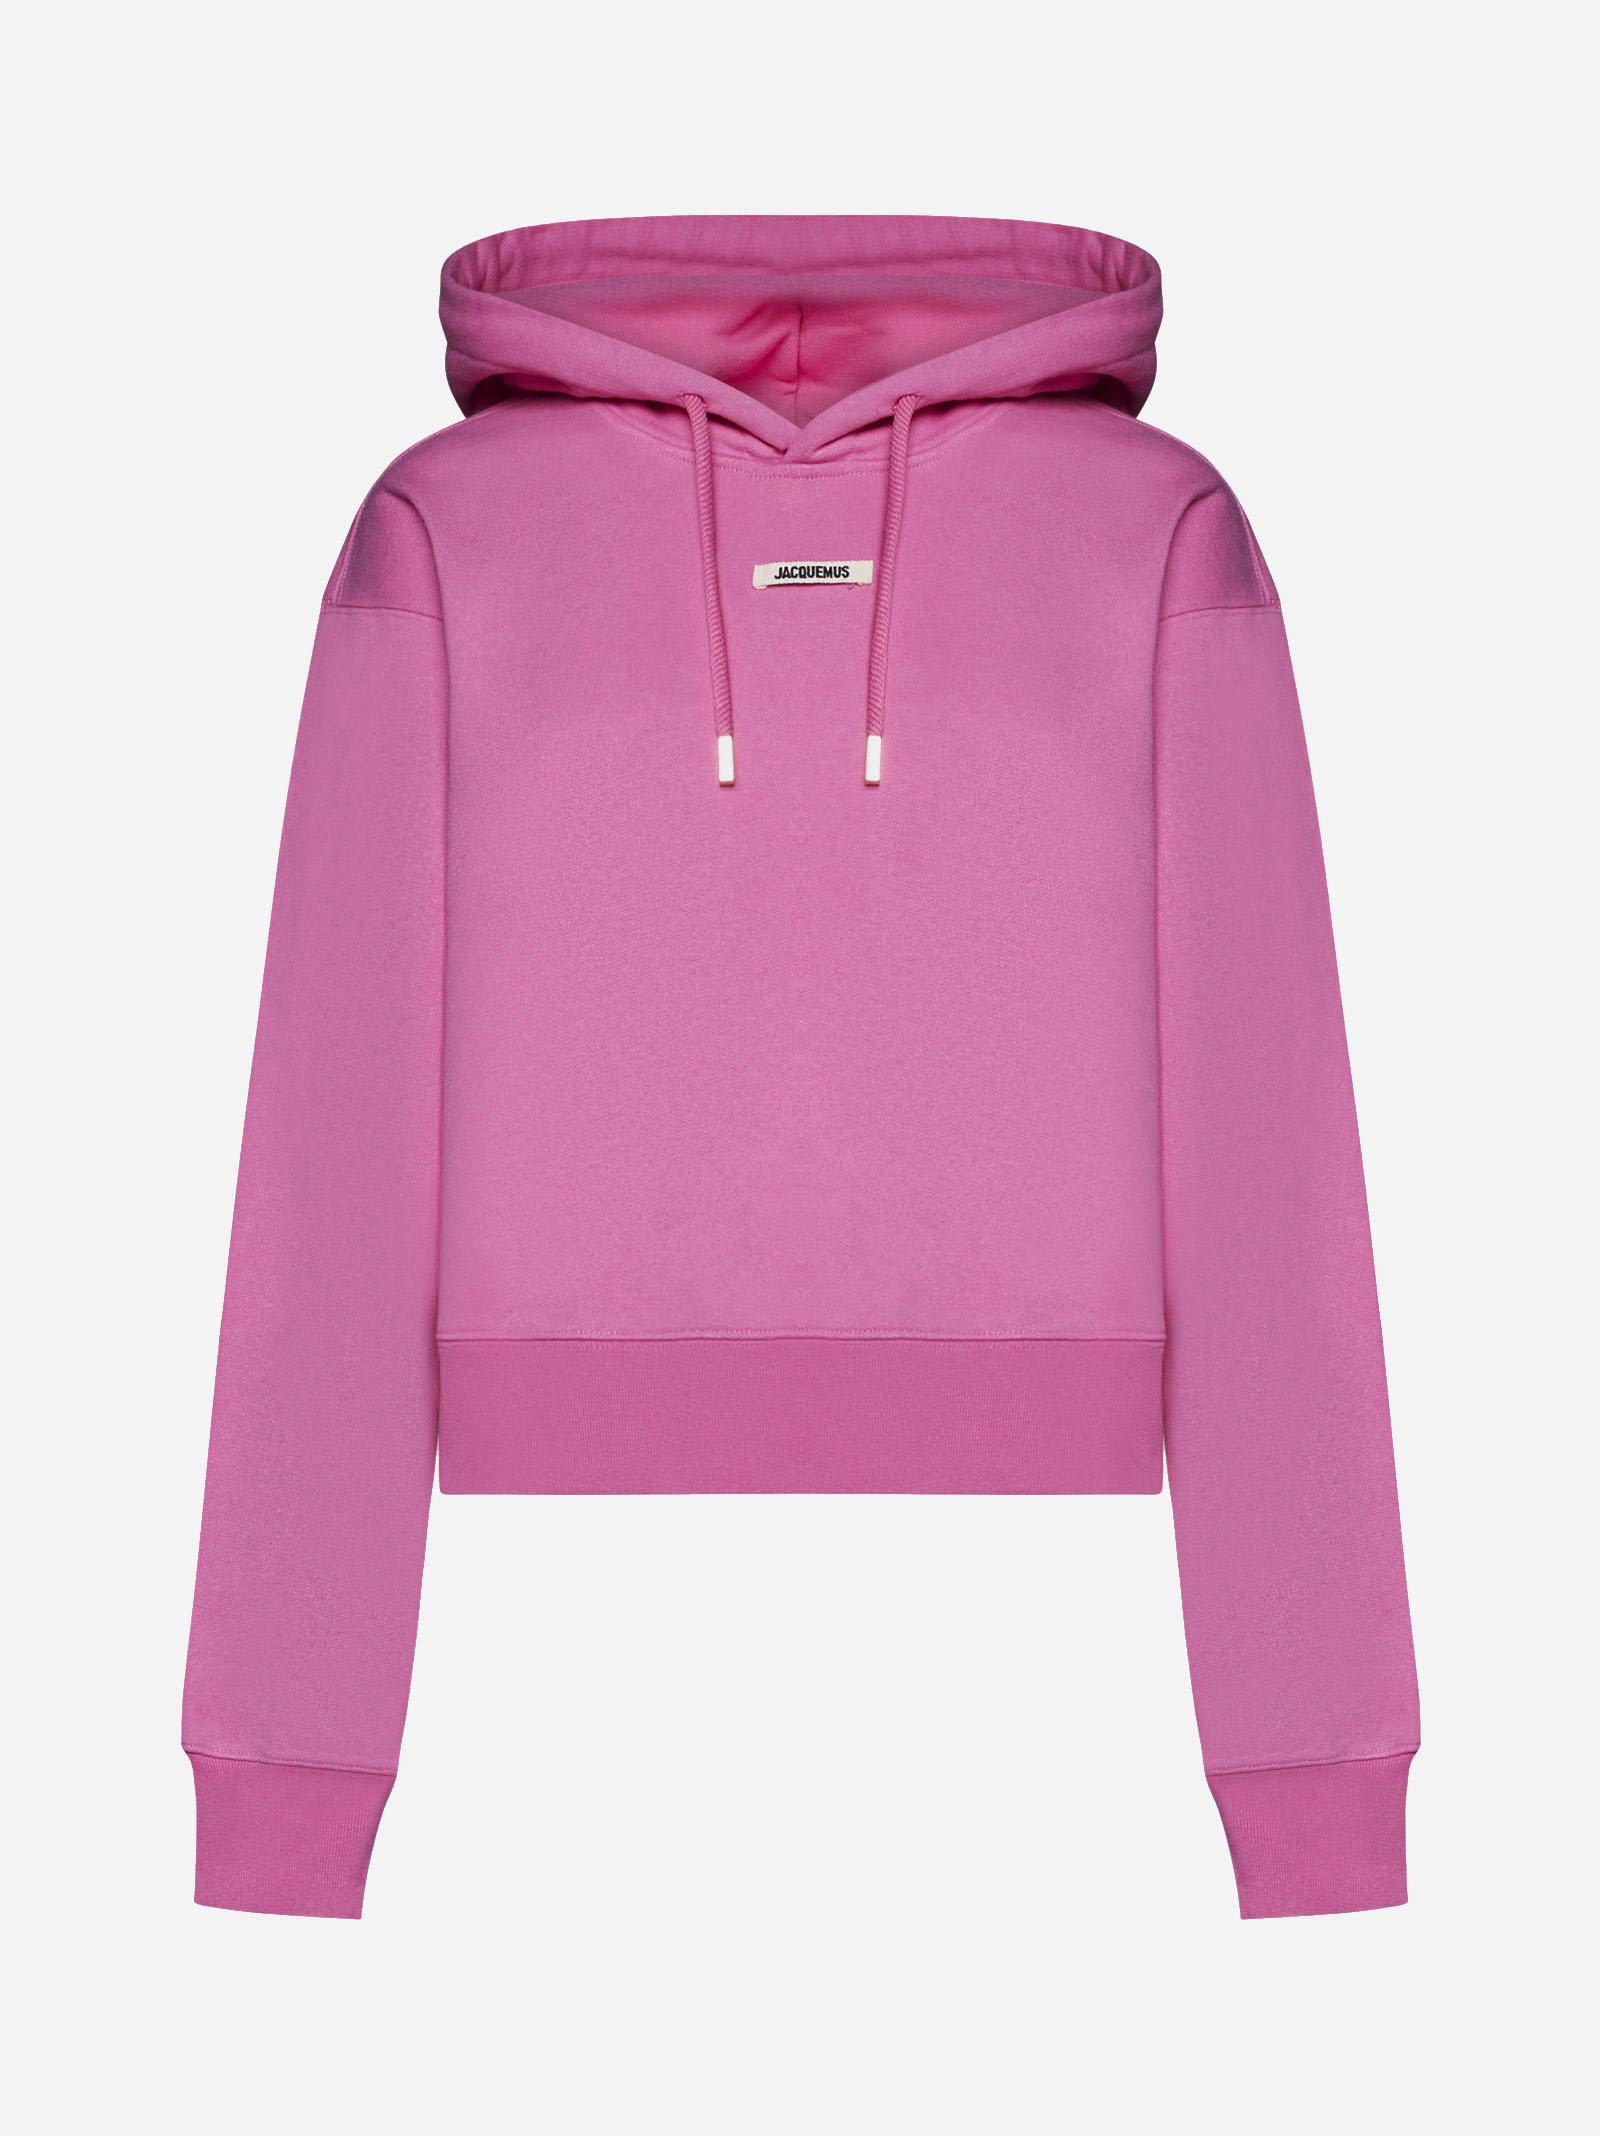 Jacquemus Gros Grain Cotton Hoodie In Pink 2